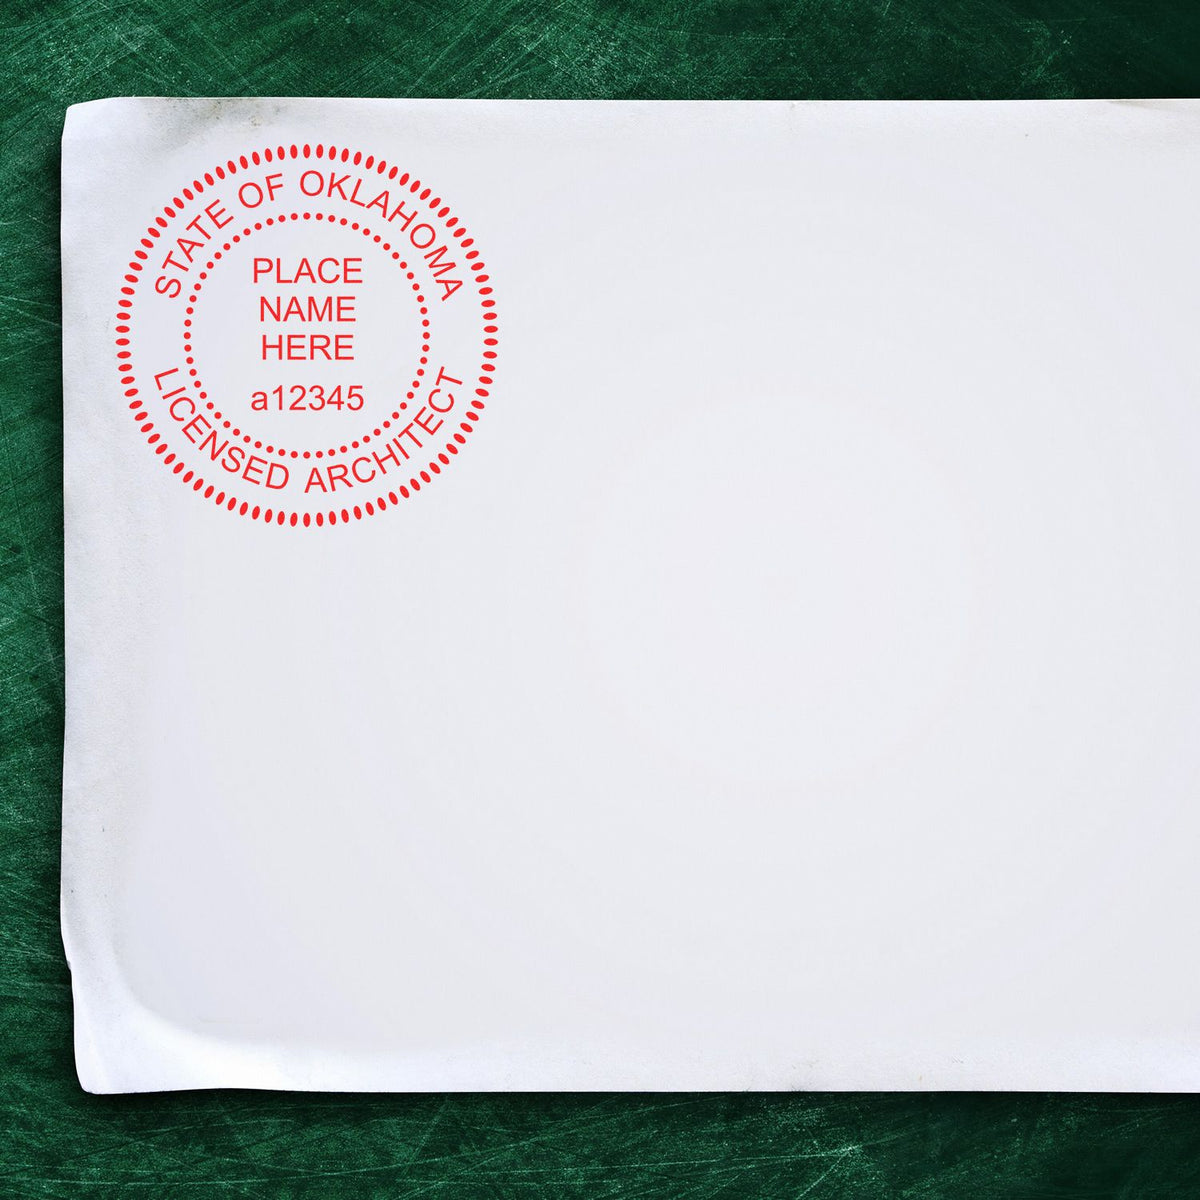 The Slim Pre-Inked Oklahoma Architect Seal Stamp stamp impression comes to life with a crisp, detailed photo on paper - showcasing true professional quality.